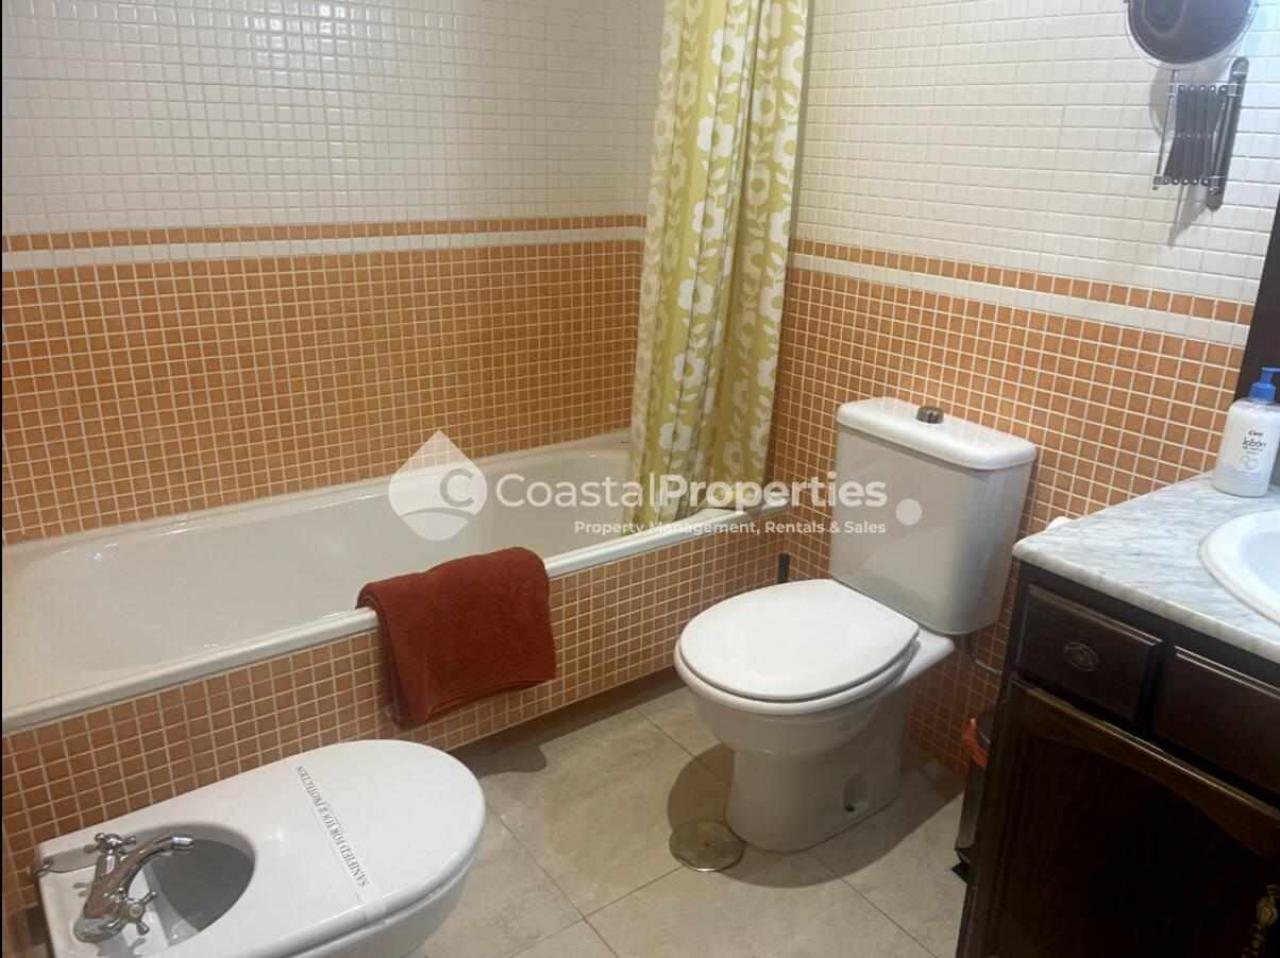 Al Andalus I, 2 Bed , 2 Bath, Communal Pool.: Apartment for Rent in Vera, Almería